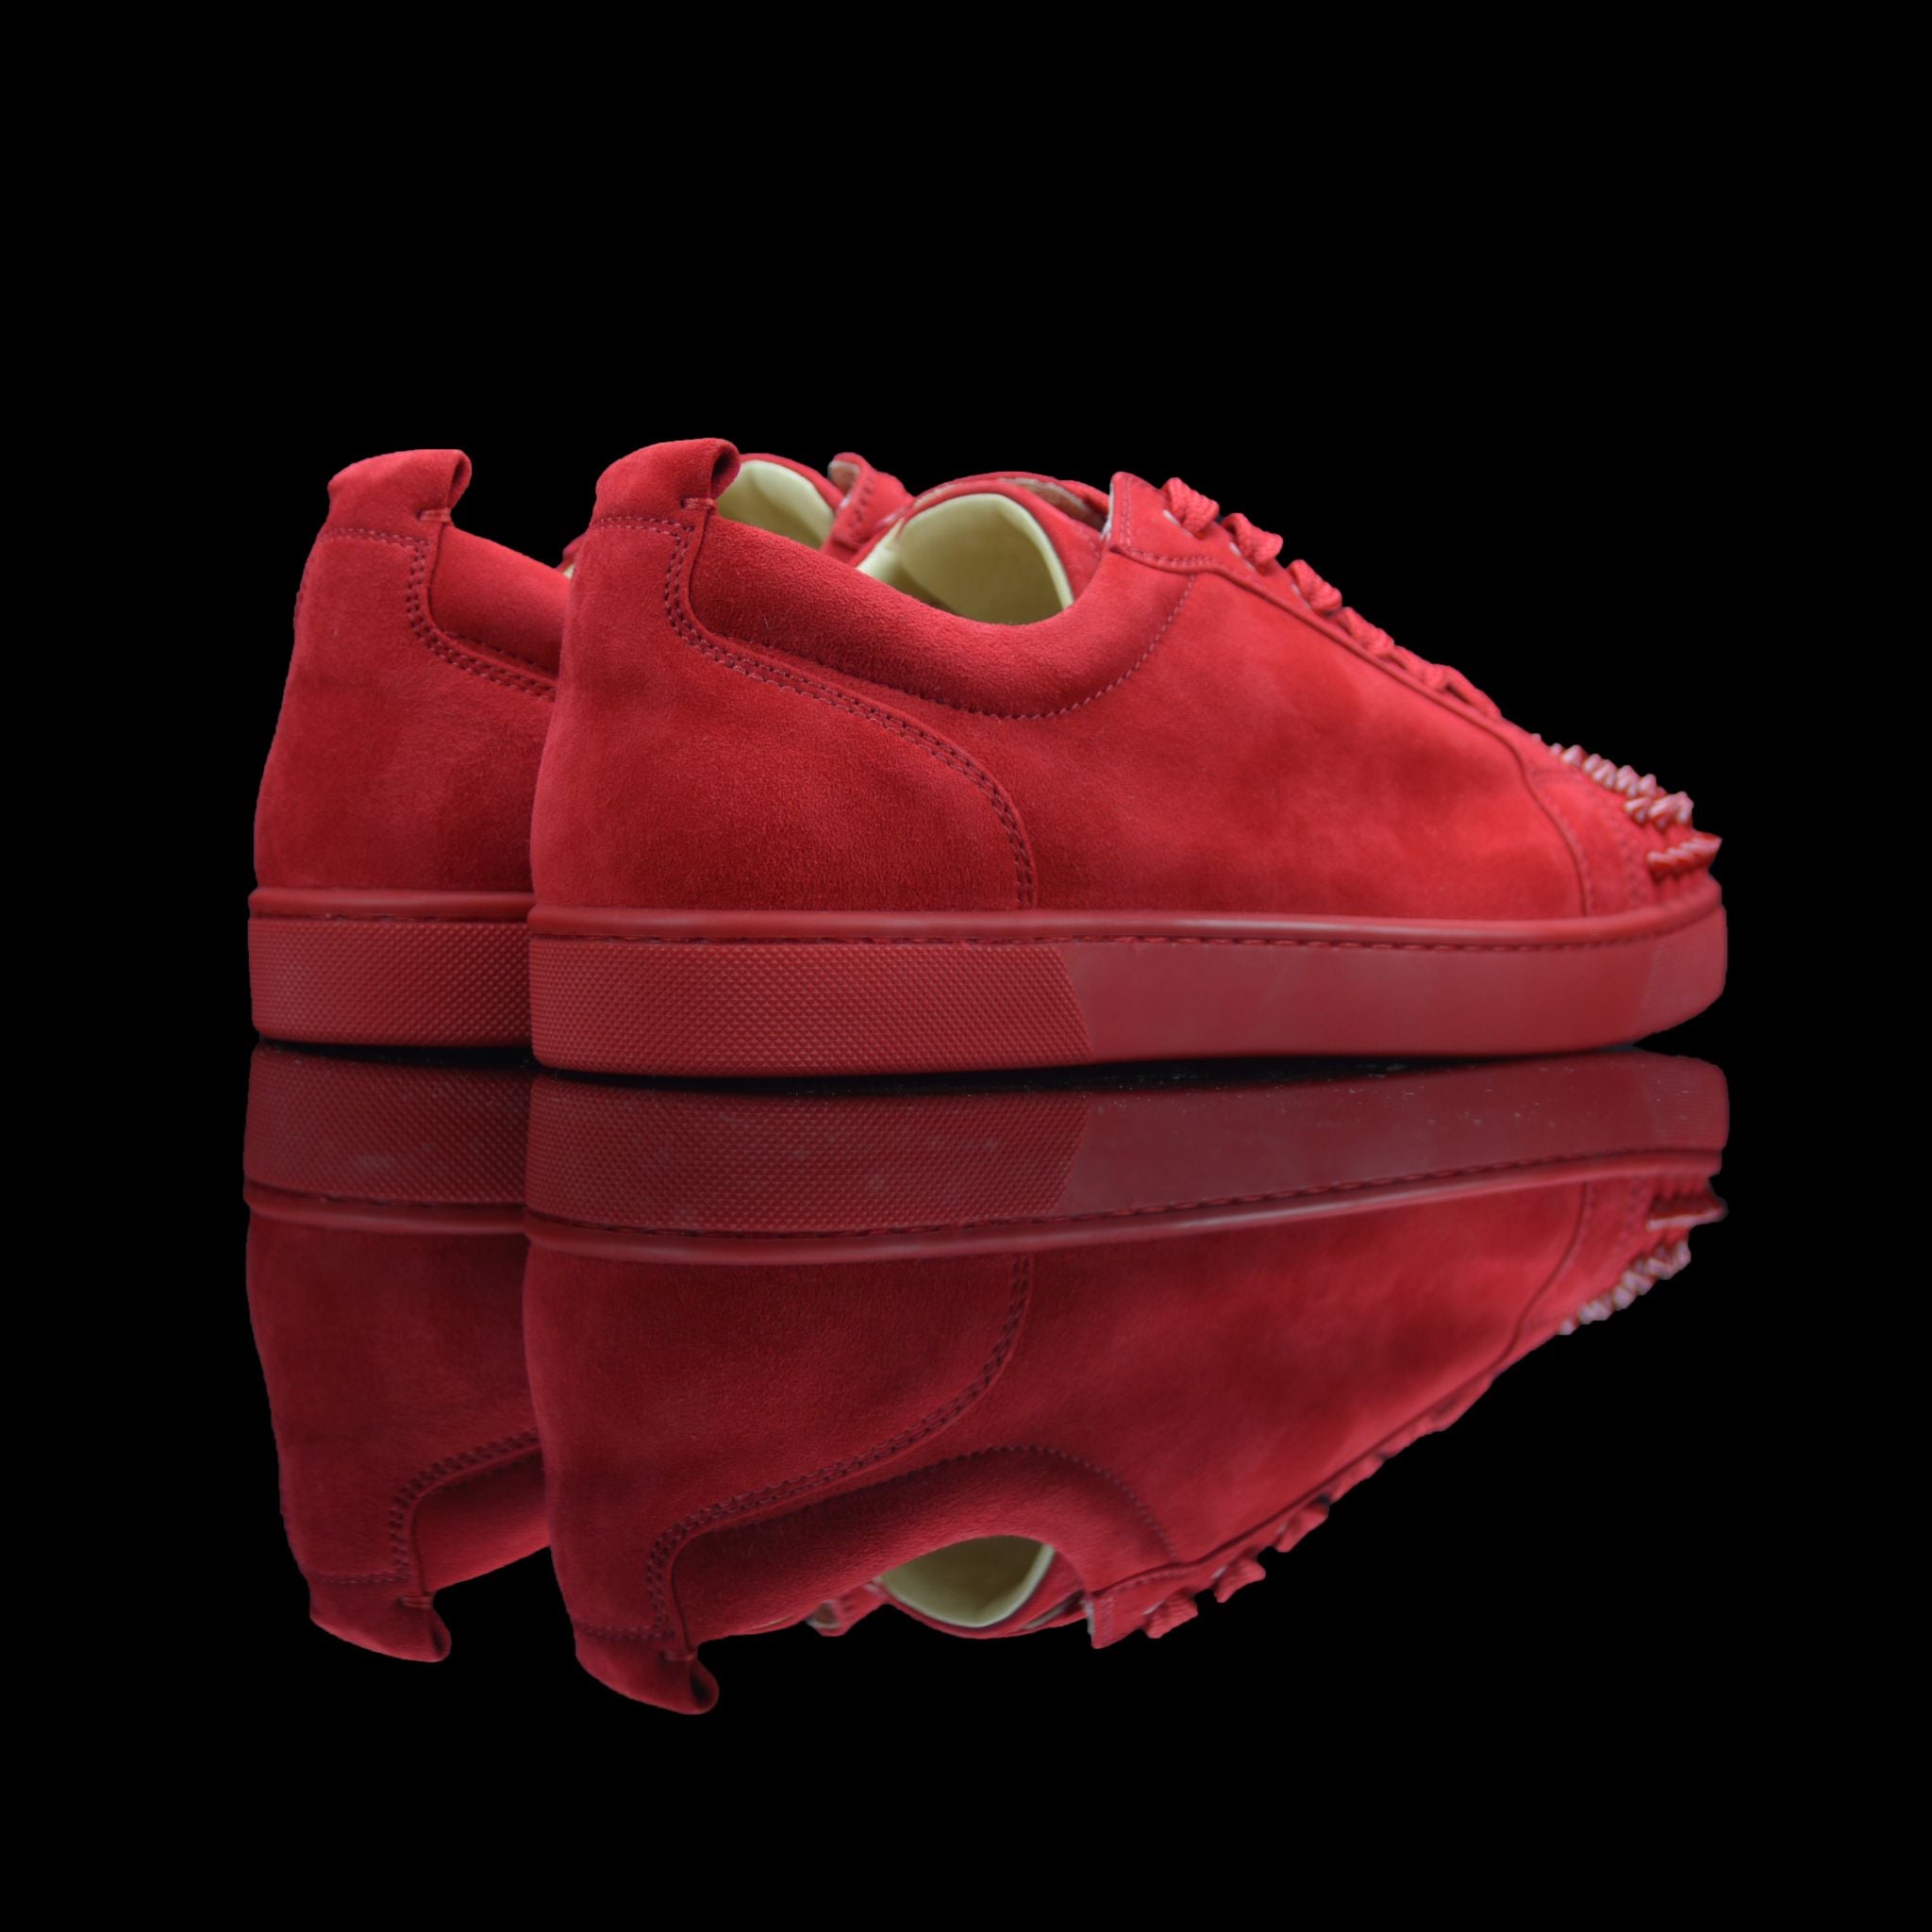 Christian Louboutin-Louis Junior Low Spikes-Product Code: 3150567 Colour: Oelillet-Red 2016 Release Limited Stock Material: Suede Velours, Metal Spikes-fabriqe.com